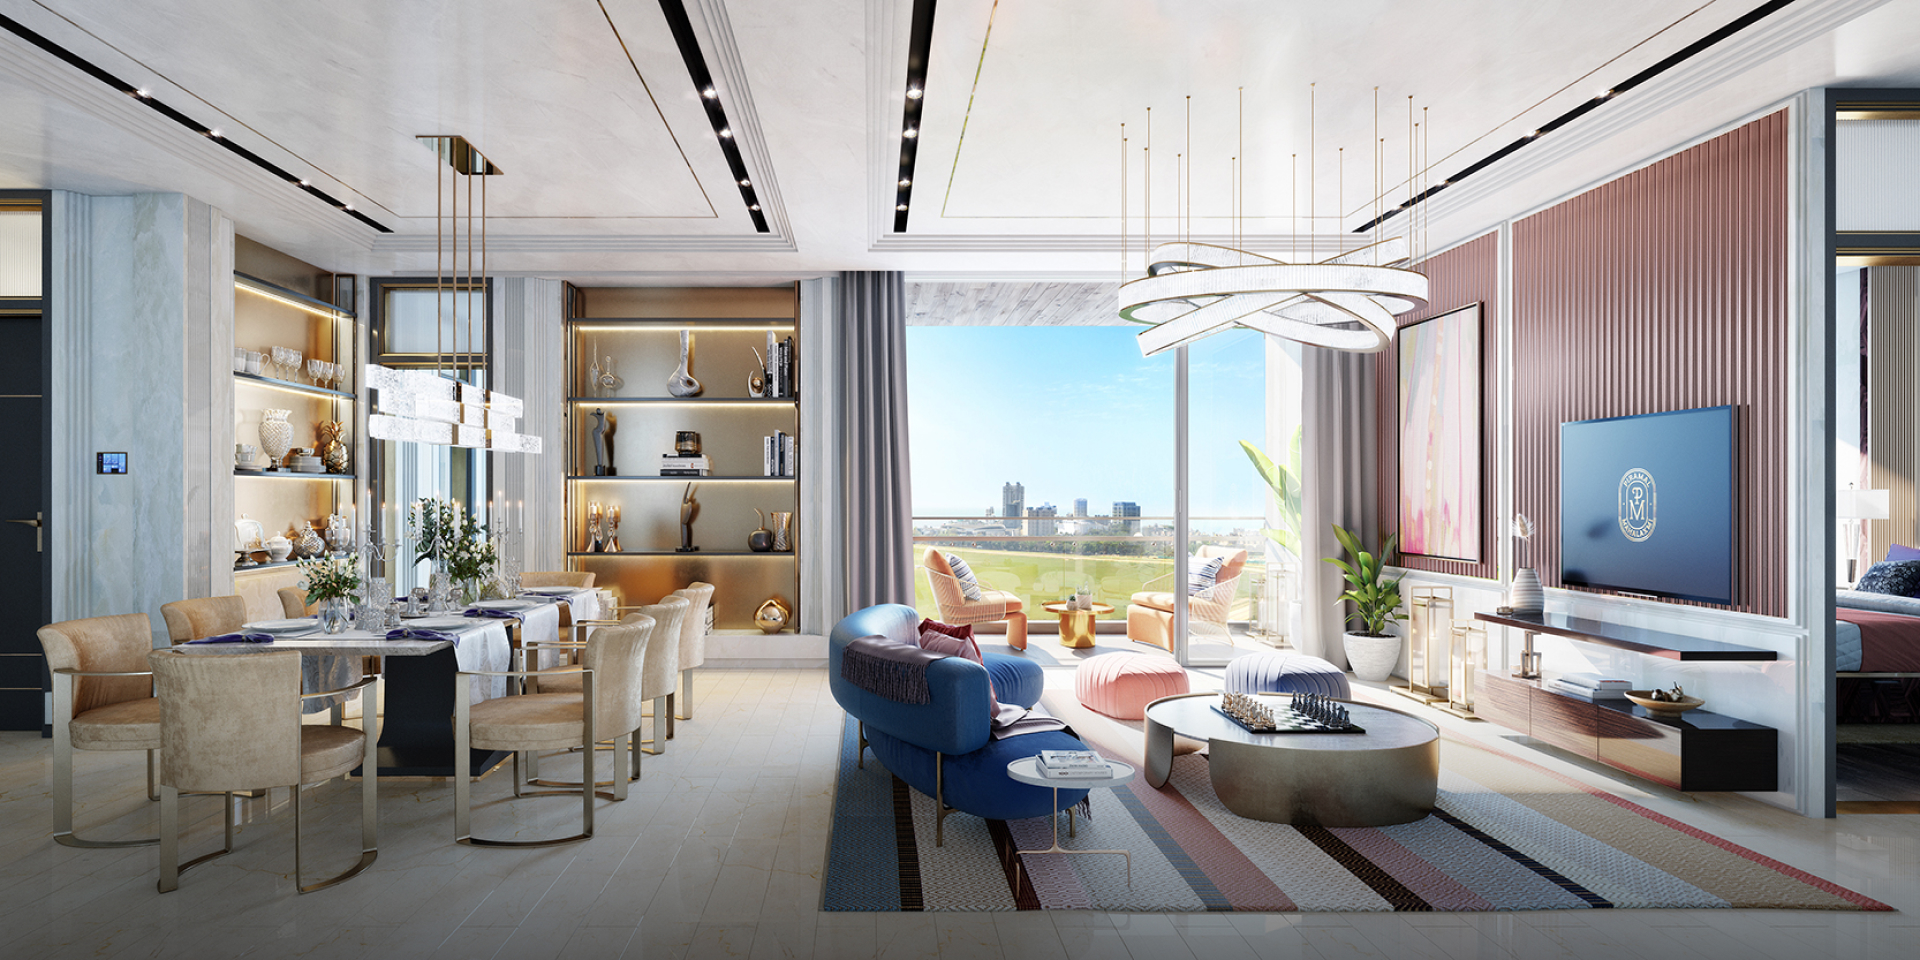 Piramal Mahalaxmi homes in South Mumbai with racecourse view from the living area